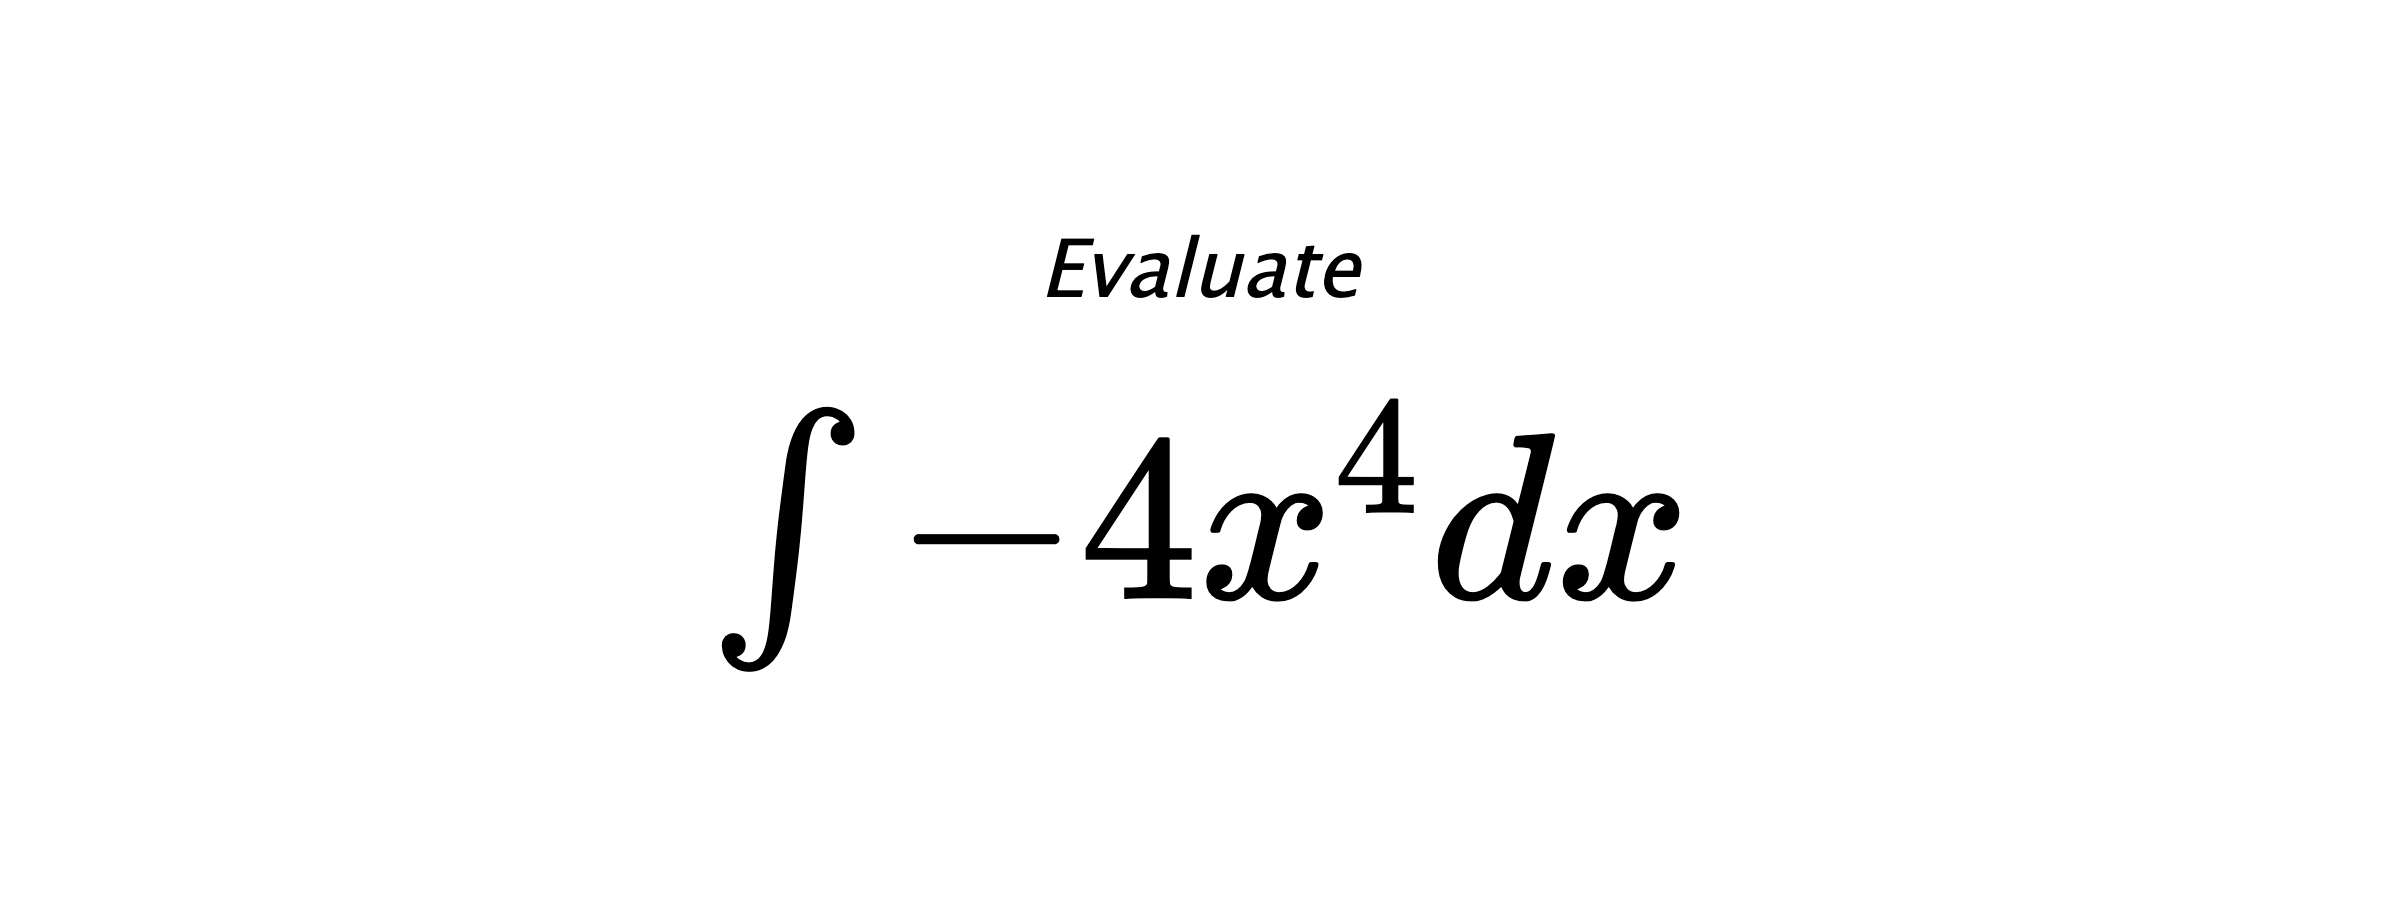 Evaluate $ \int - 4 x^{4} dx $